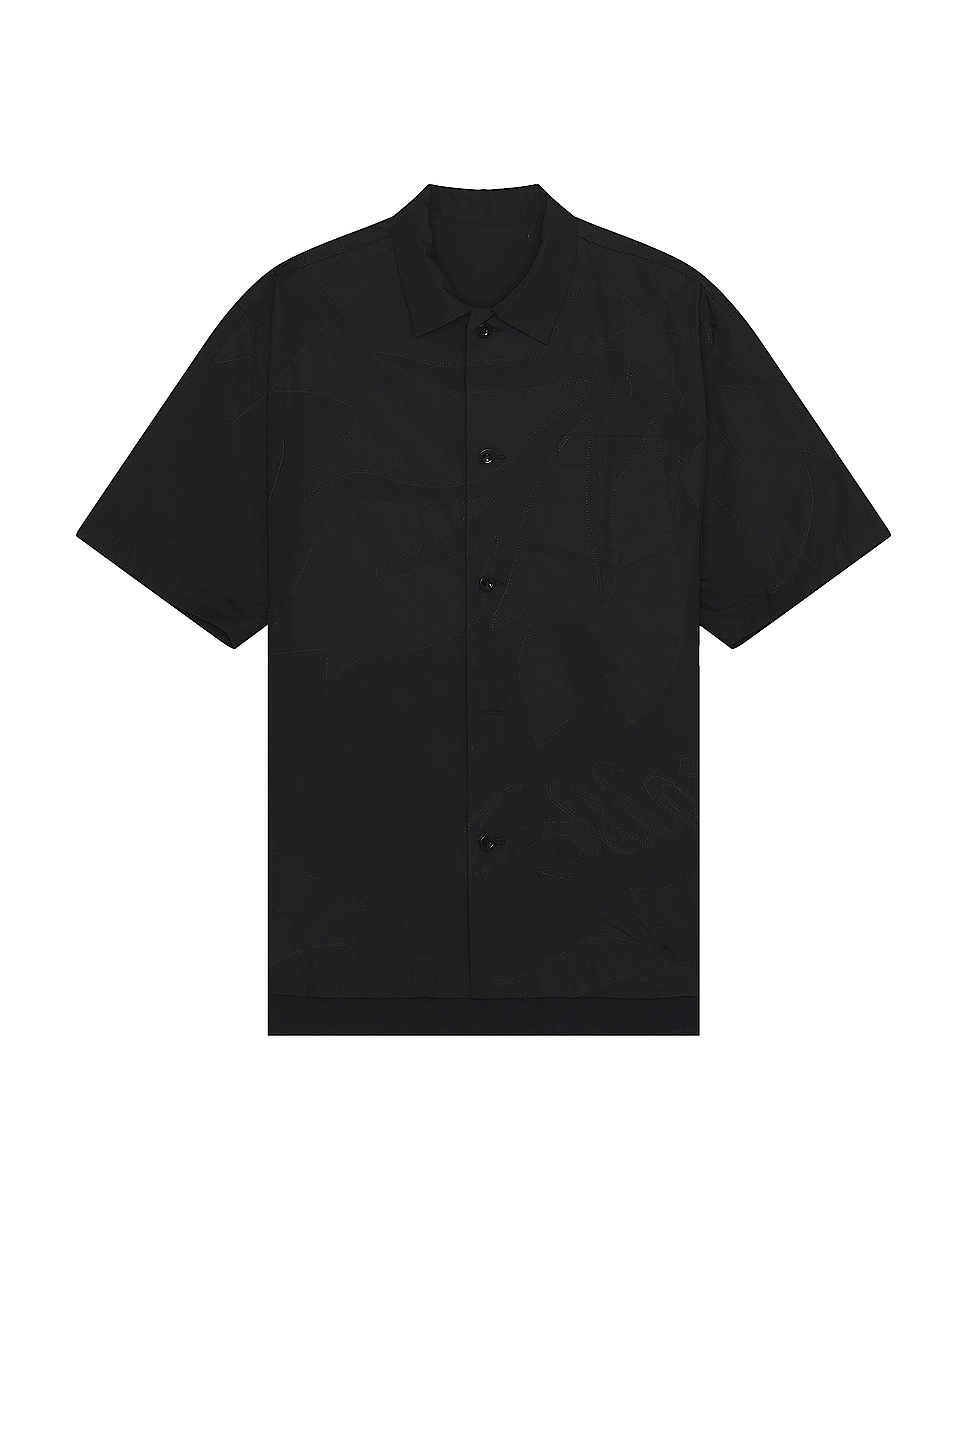 Image 1 of Sacai Floral Embroidered Patch Cotton Poplin Shirt in Black